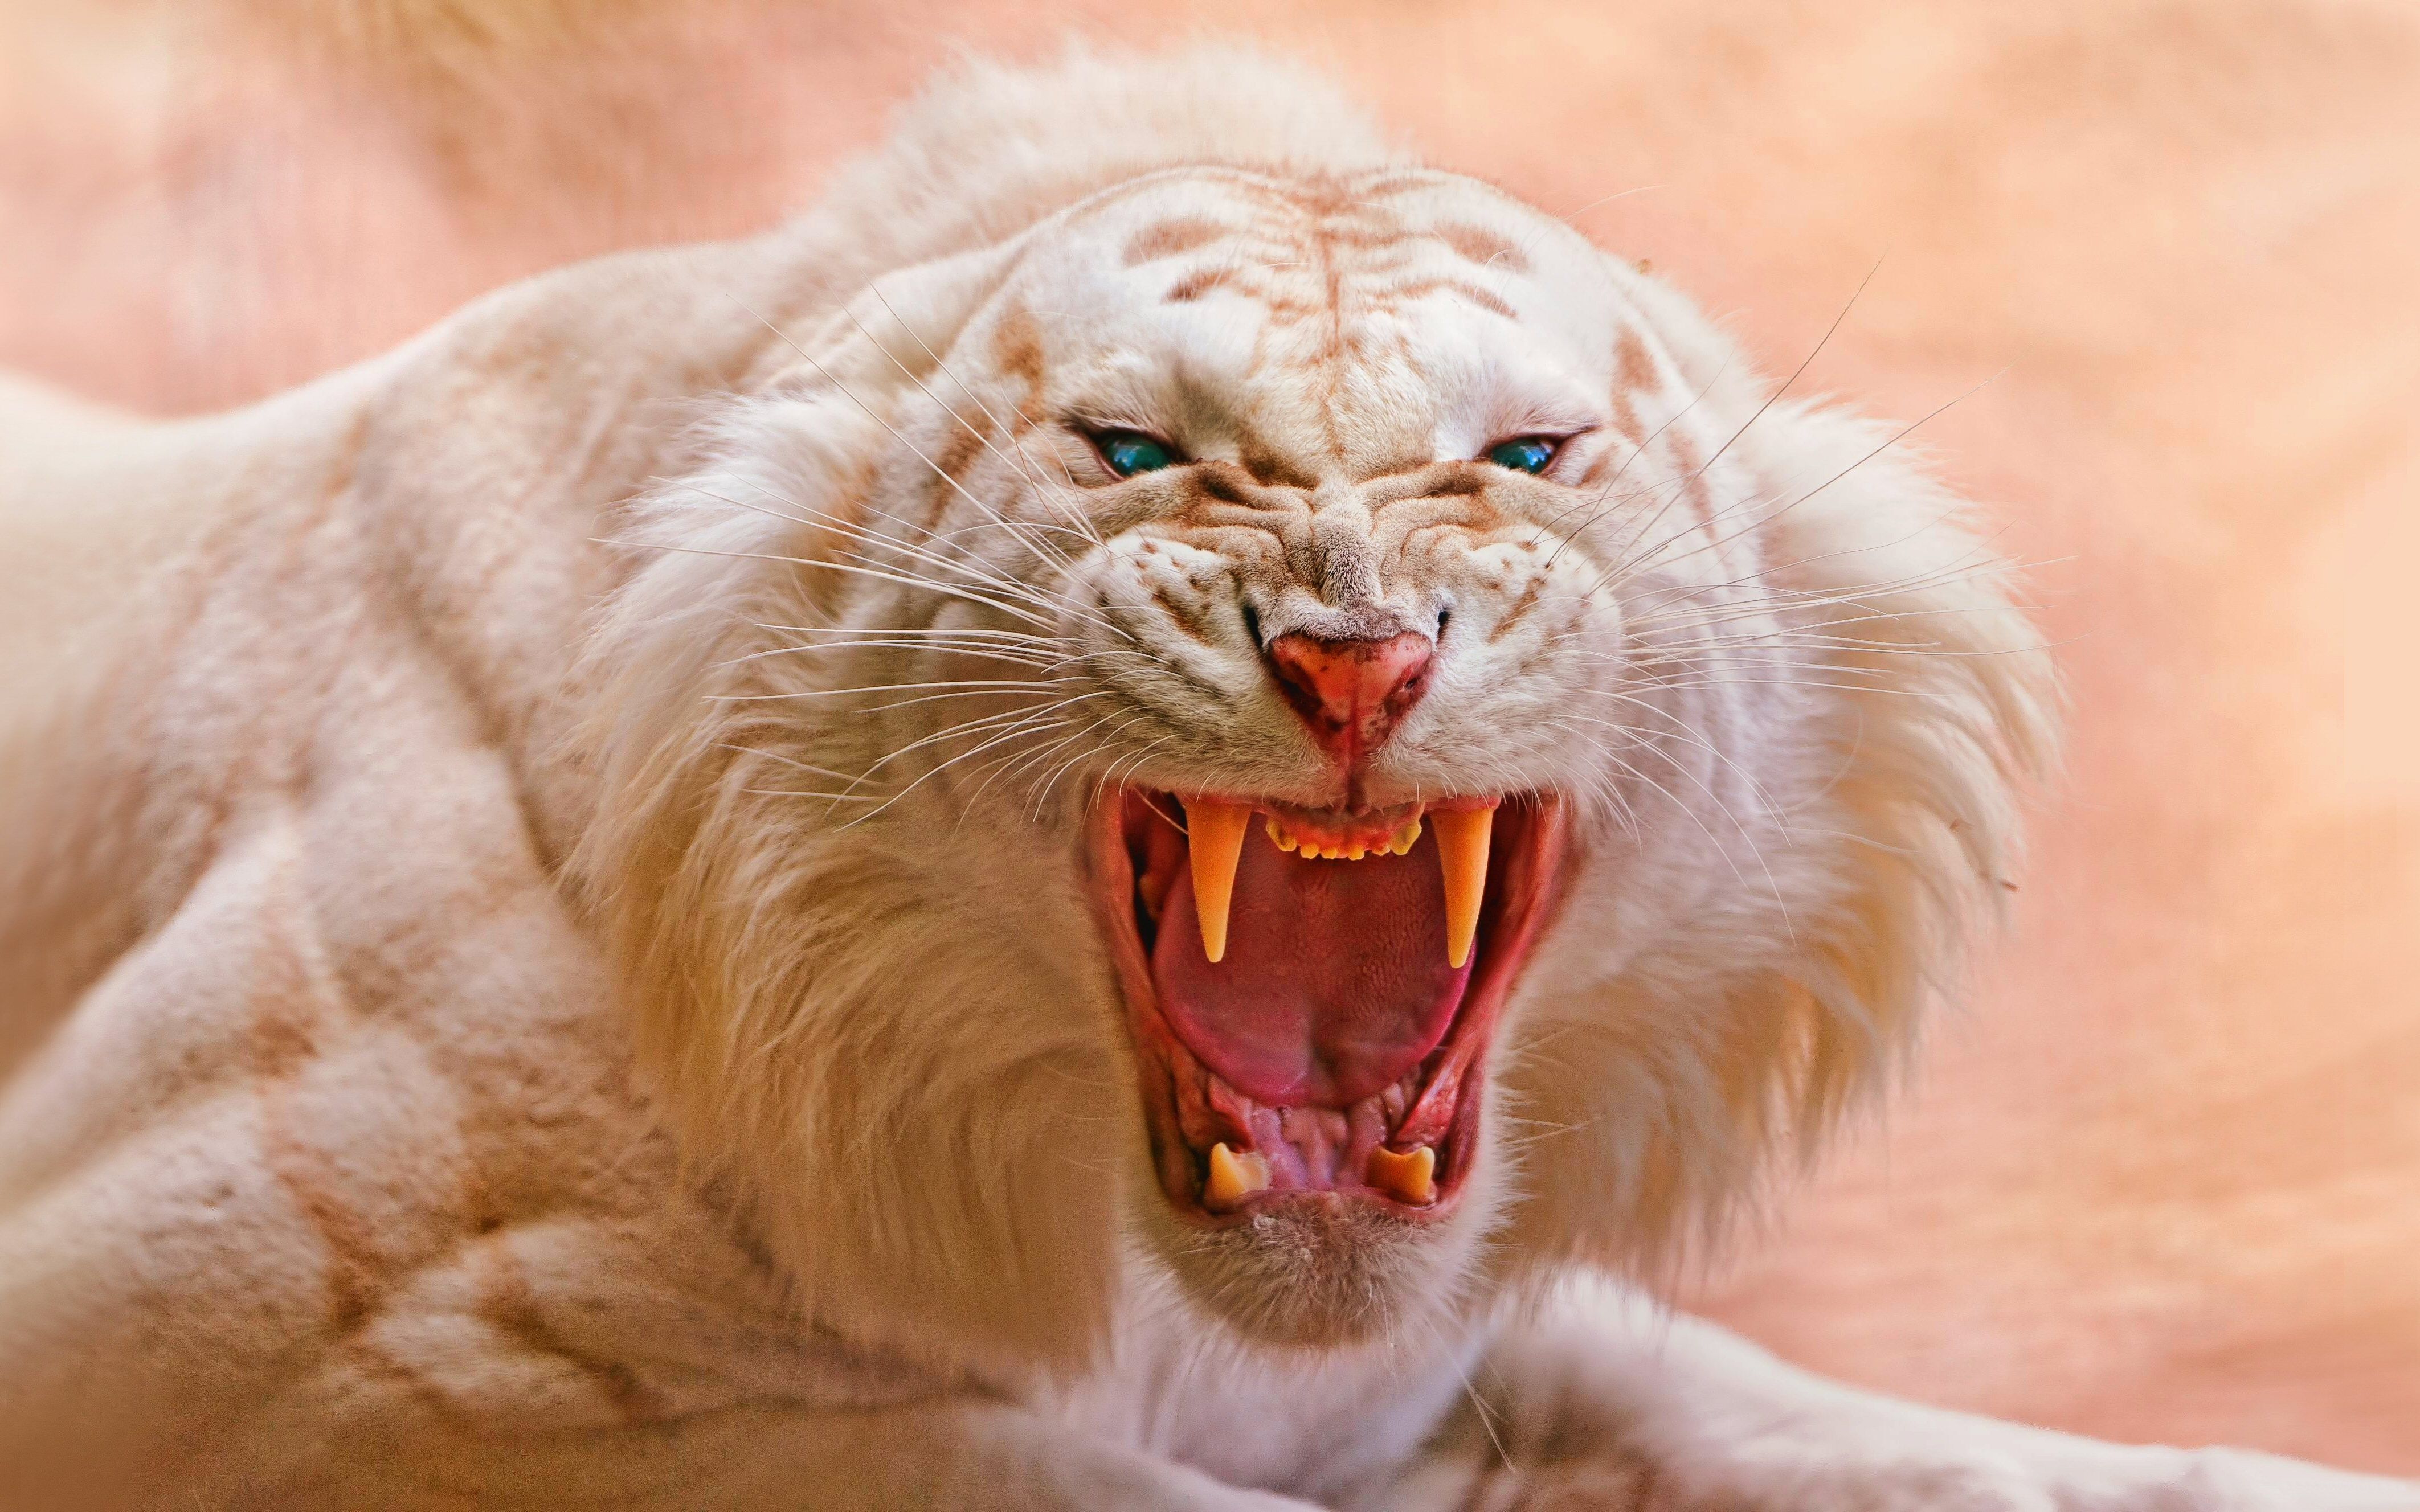 white tiger 4k ultra hd wallpapers » High quality walls